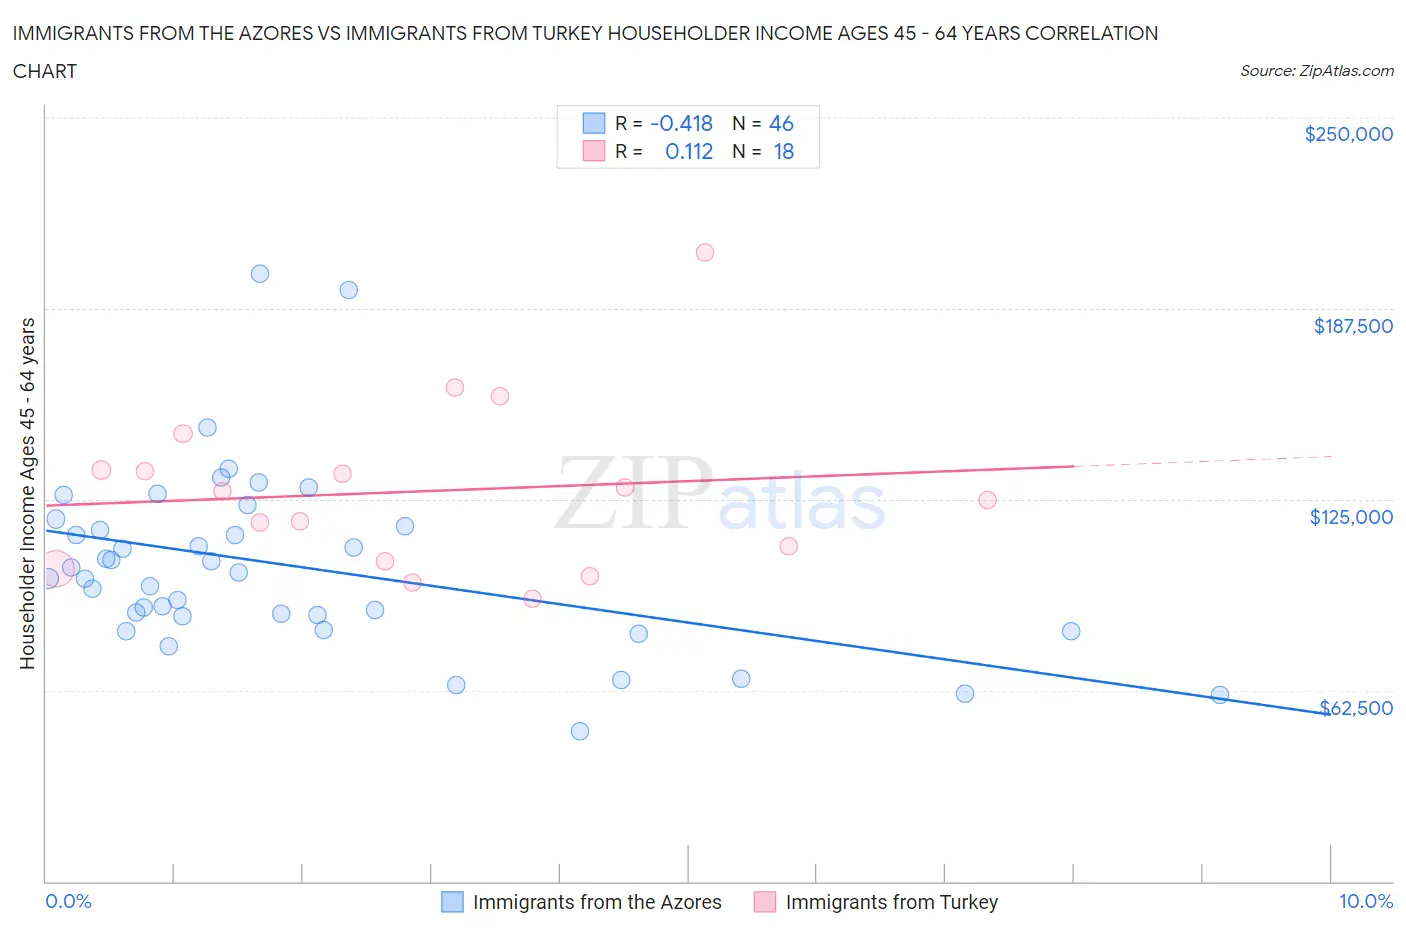 Immigrants from the Azores vs Immigrants from Turkey Householder Income Ages 45 - 64 years